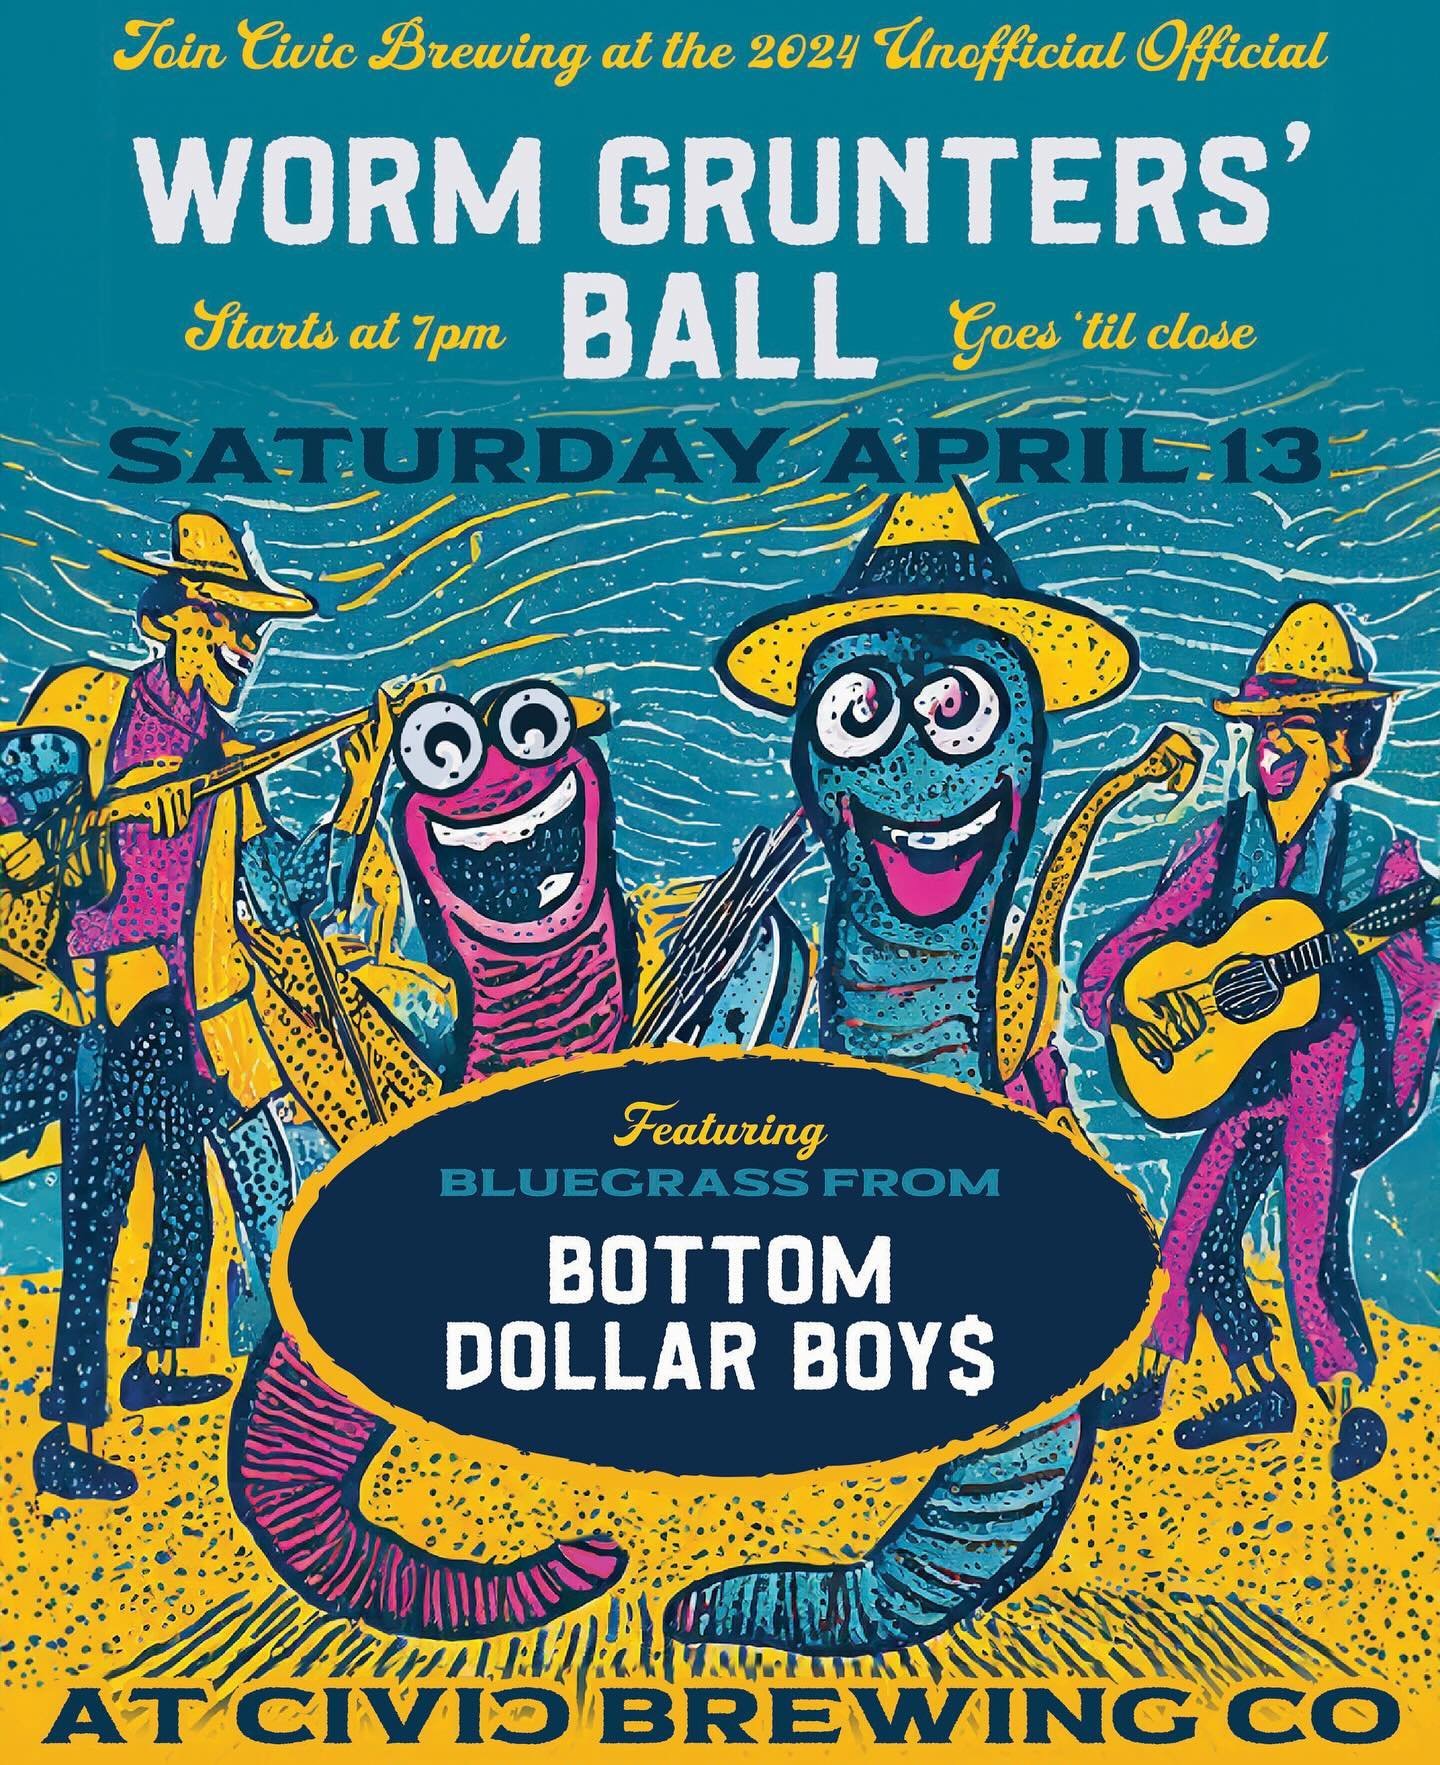 This Saturday is Sopchoppy&rsquo;s famous Worm Gruntin&rsquo; Festival! Explore downtown with events, vendors, music, food, and more. We&rsquo;ll be open and are hosting the Worm Grunters&rsquo; Ball after the fest with live bluegrass music from the 